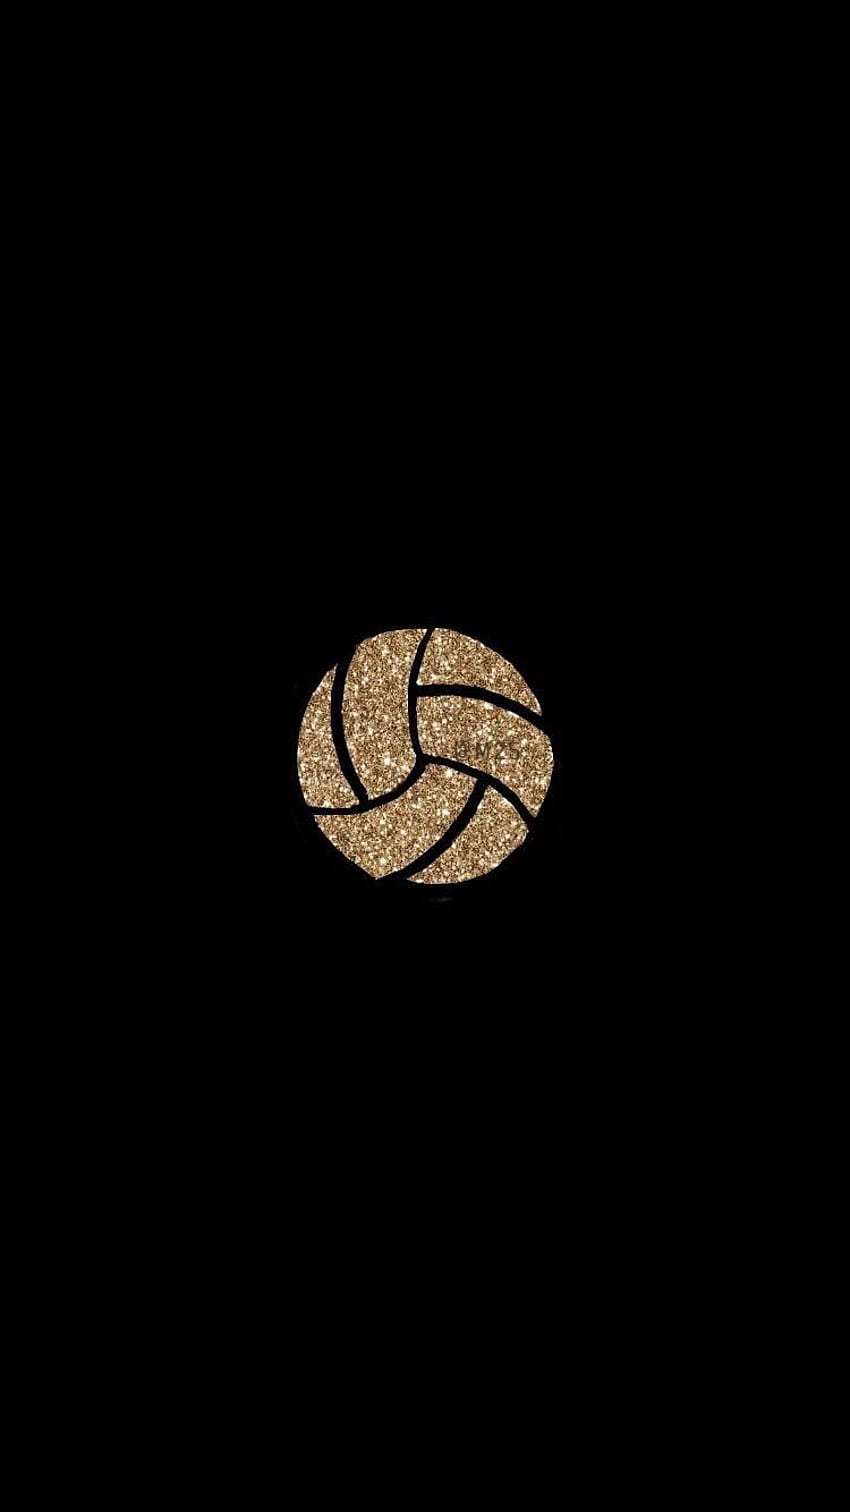 A gold volleyball on black background - Volleyball, glitter